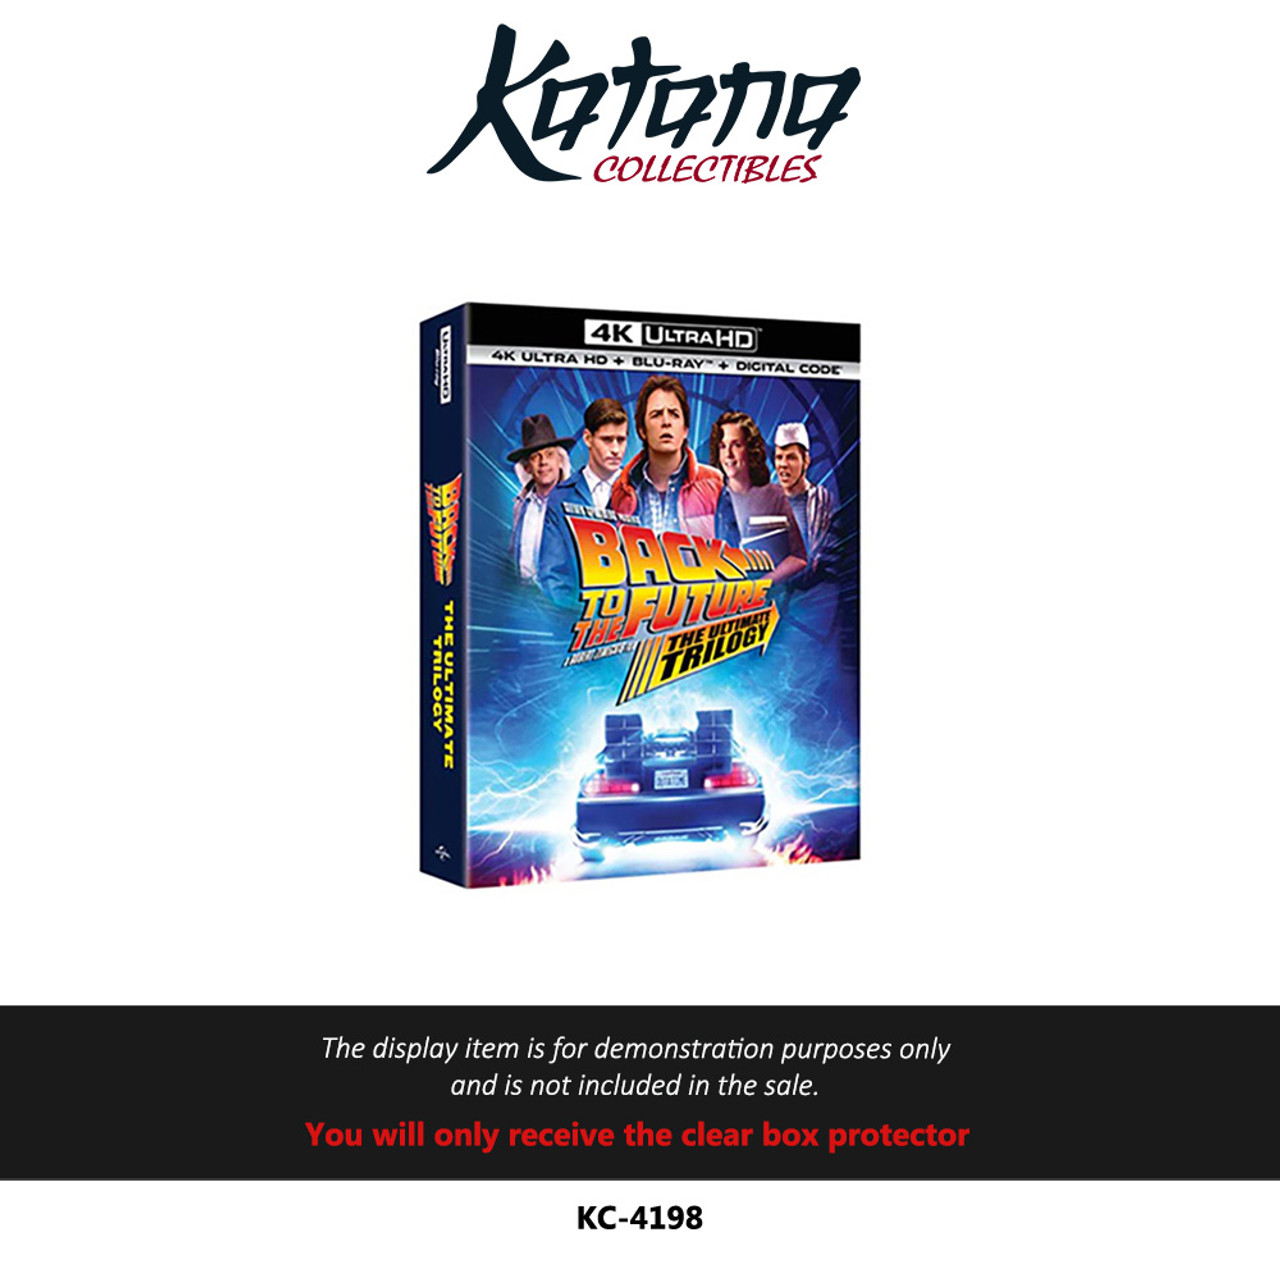 Katana Collectibles Protector For Back to the Future Steelbook Collection